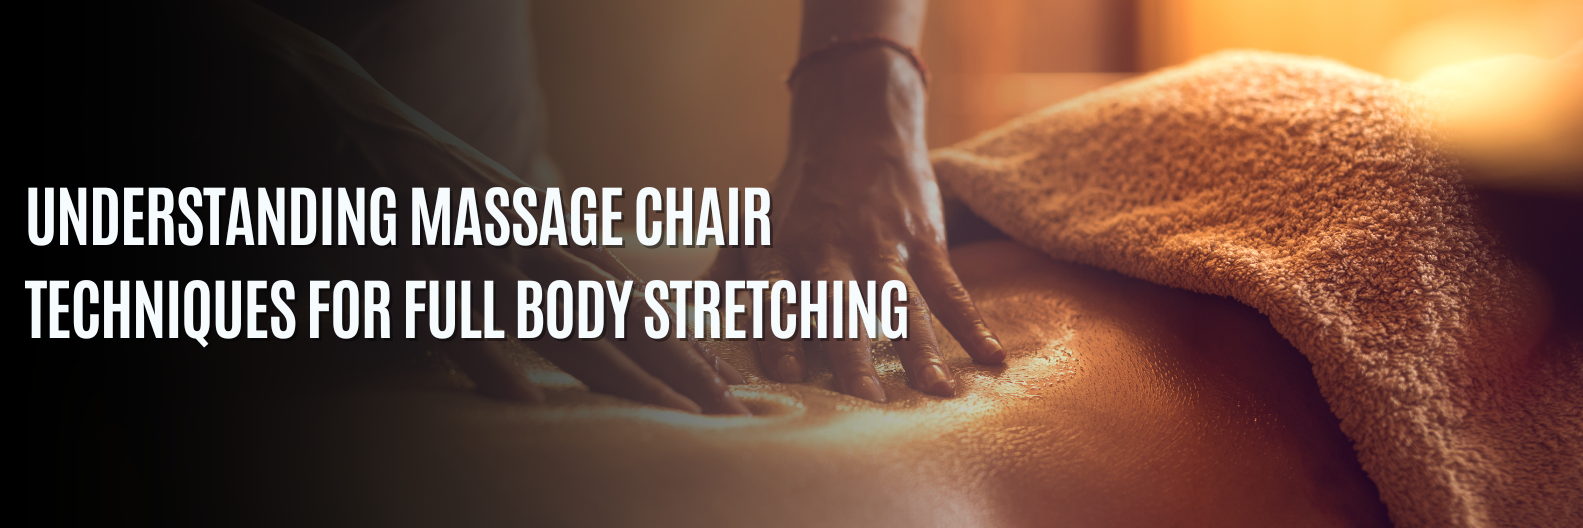 Experience ultimate relaxation and muscle relief with our advanced stretch massage chairs, designed with cutting-edge Massage Chair Techniques for a spa-like indulgence at home.